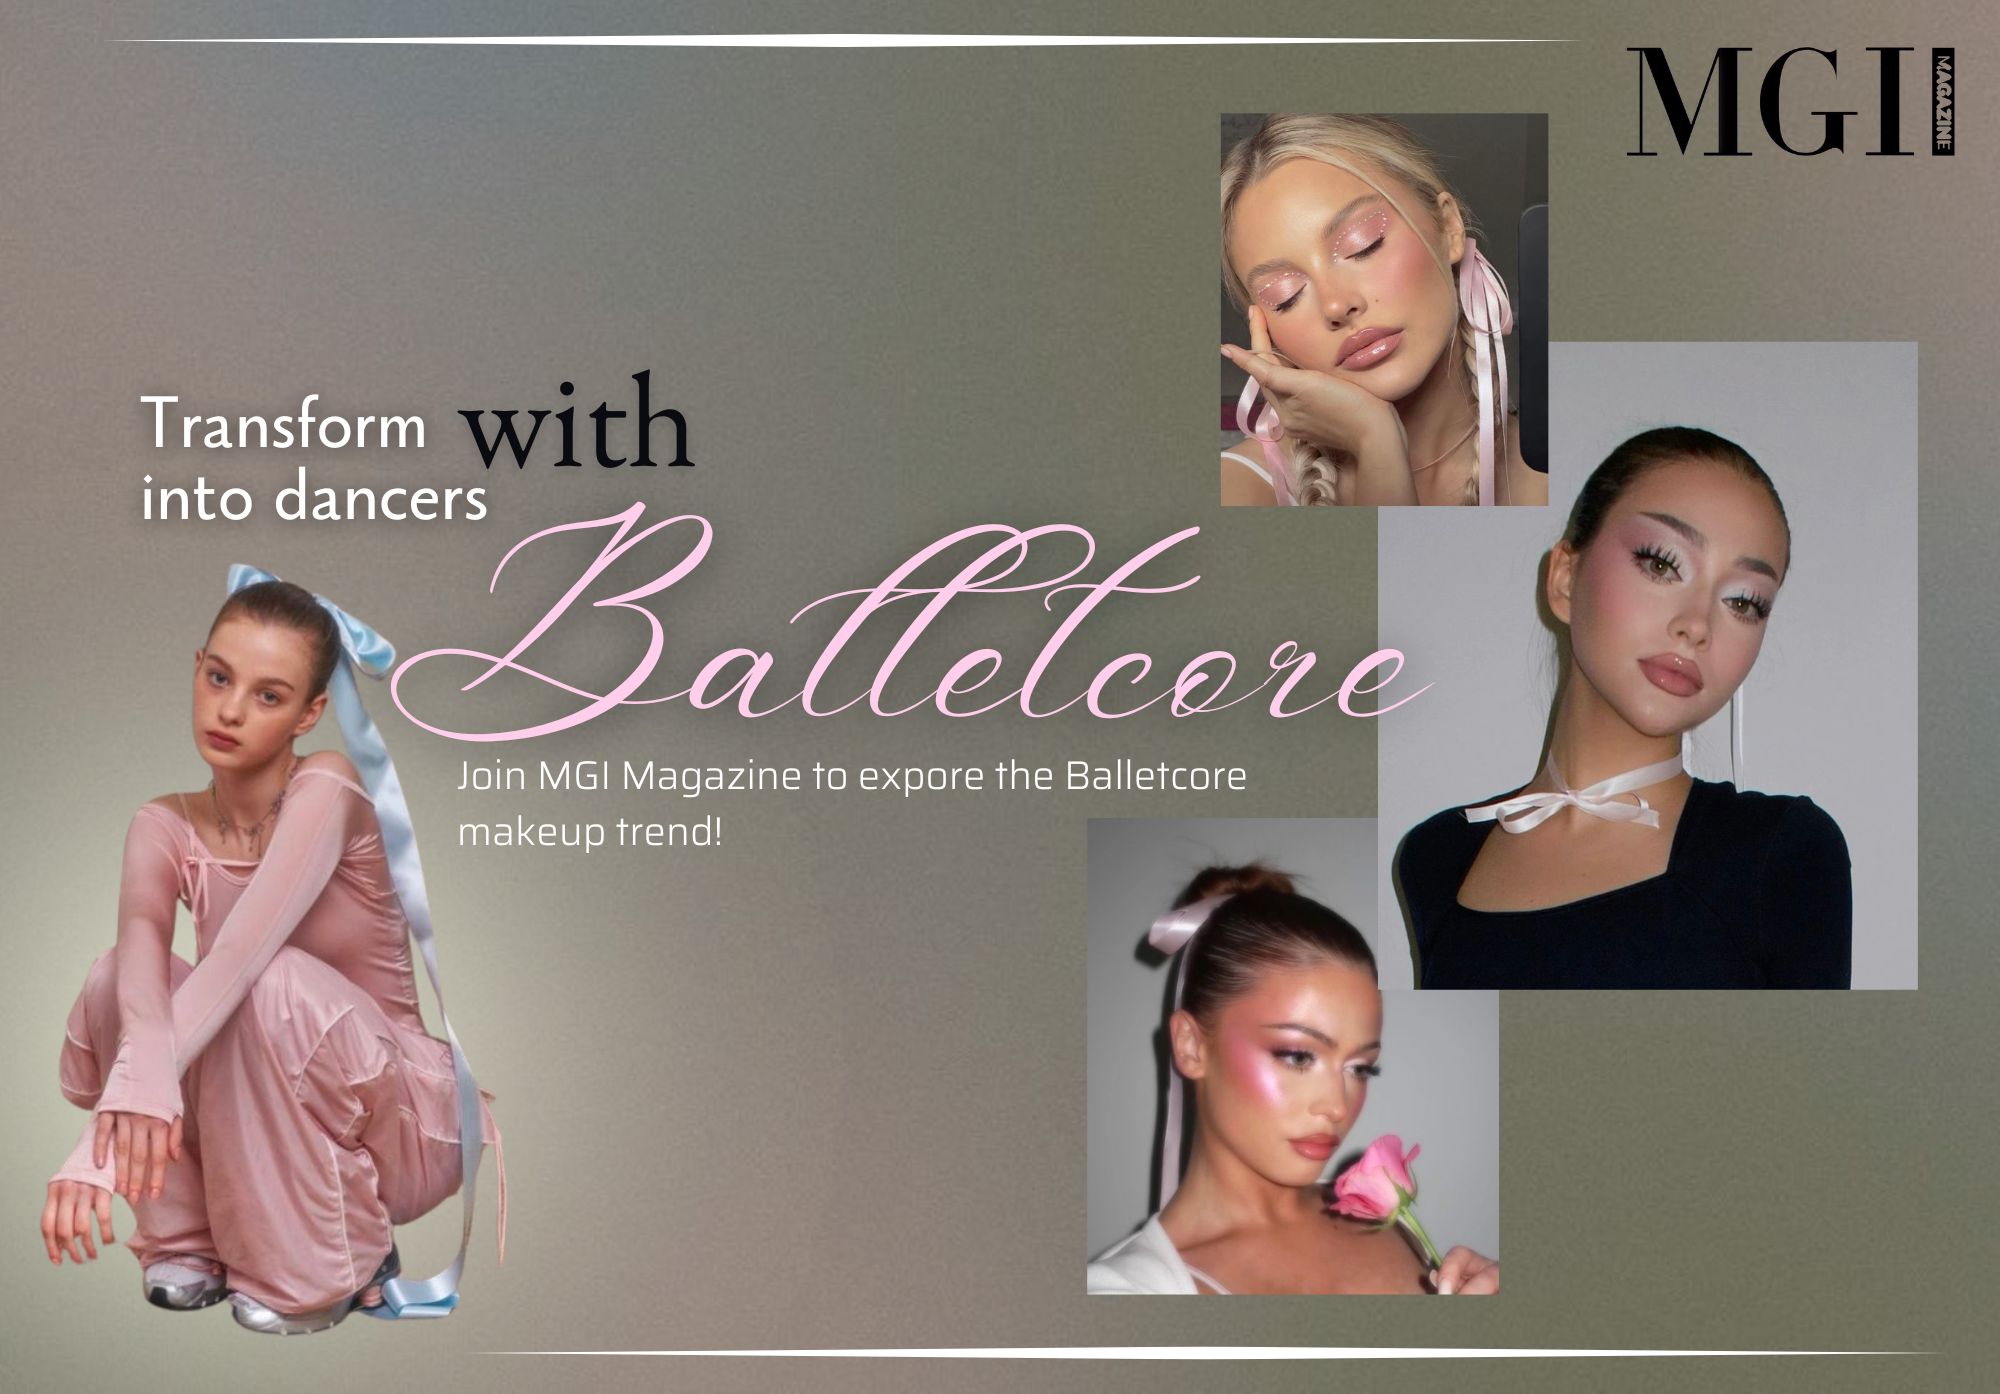 Transform into dancers with the Balletcore makeup trend